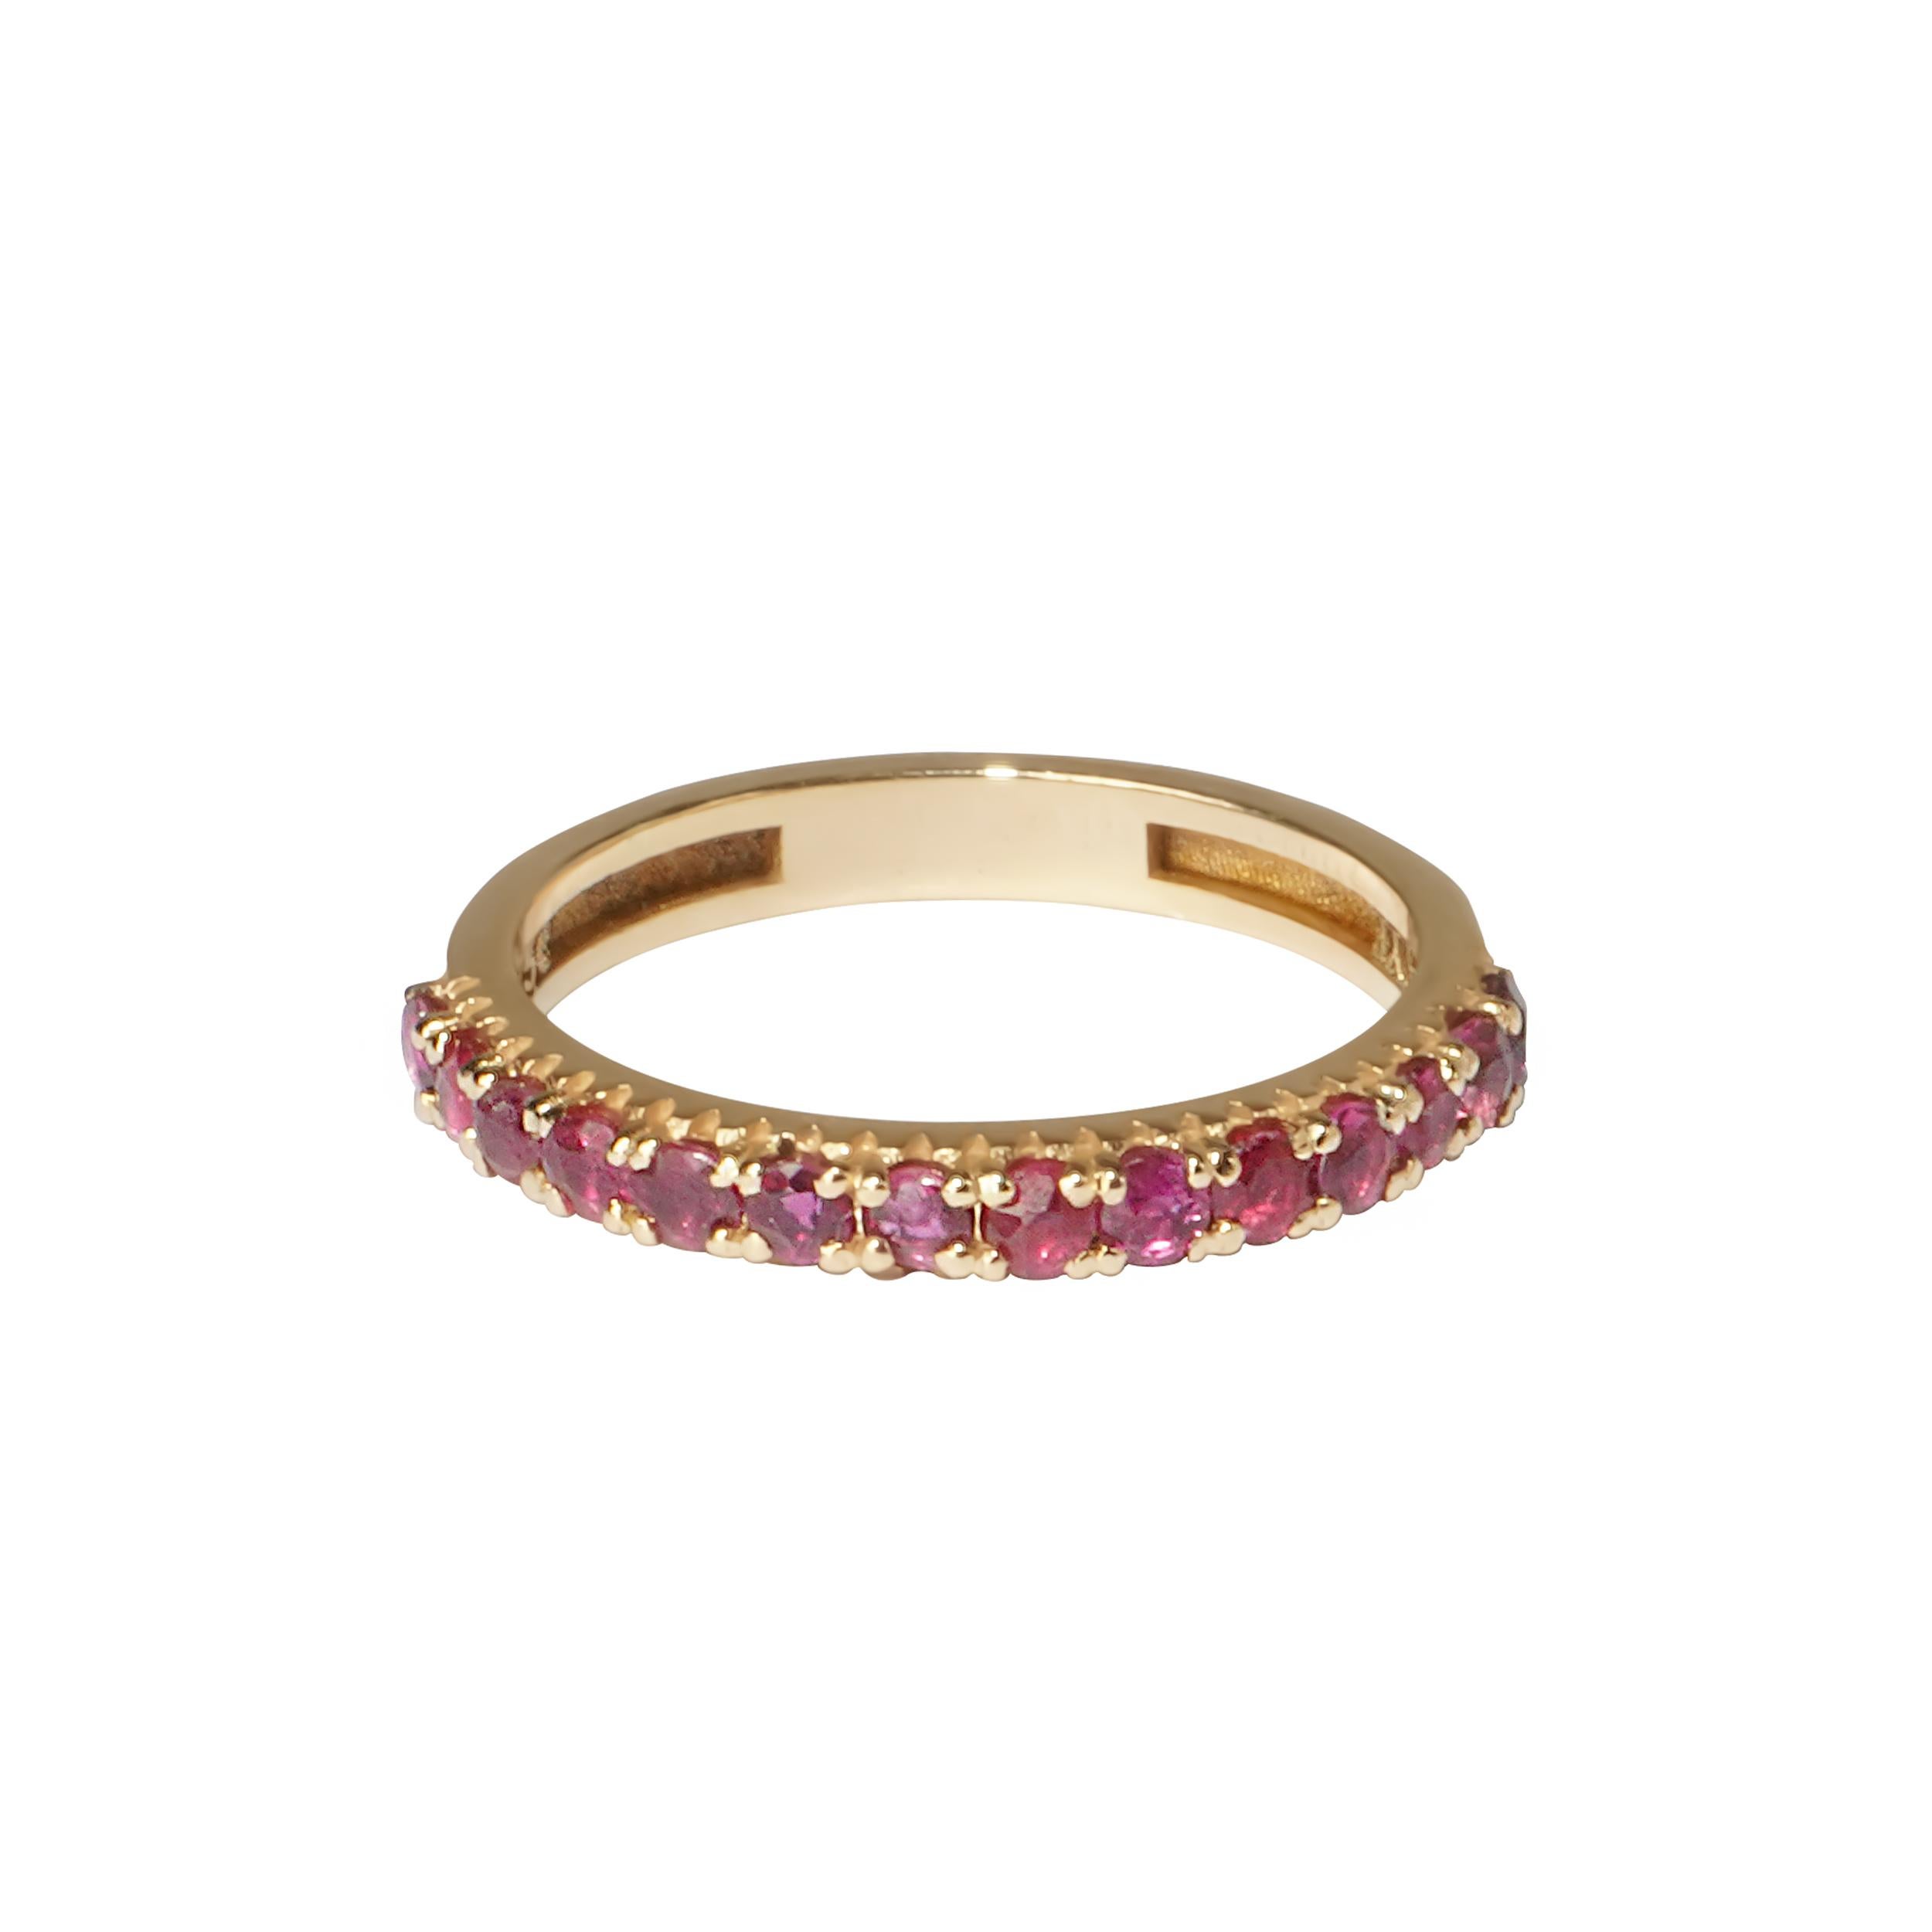 If you are looking for a ring that will make you stand out from the crowd, look no further than our ruby band!

Our ruby band is a stunning piece of jewelry that showcases the beauty and brilliance of natural rubies. It features an 18k solid gold